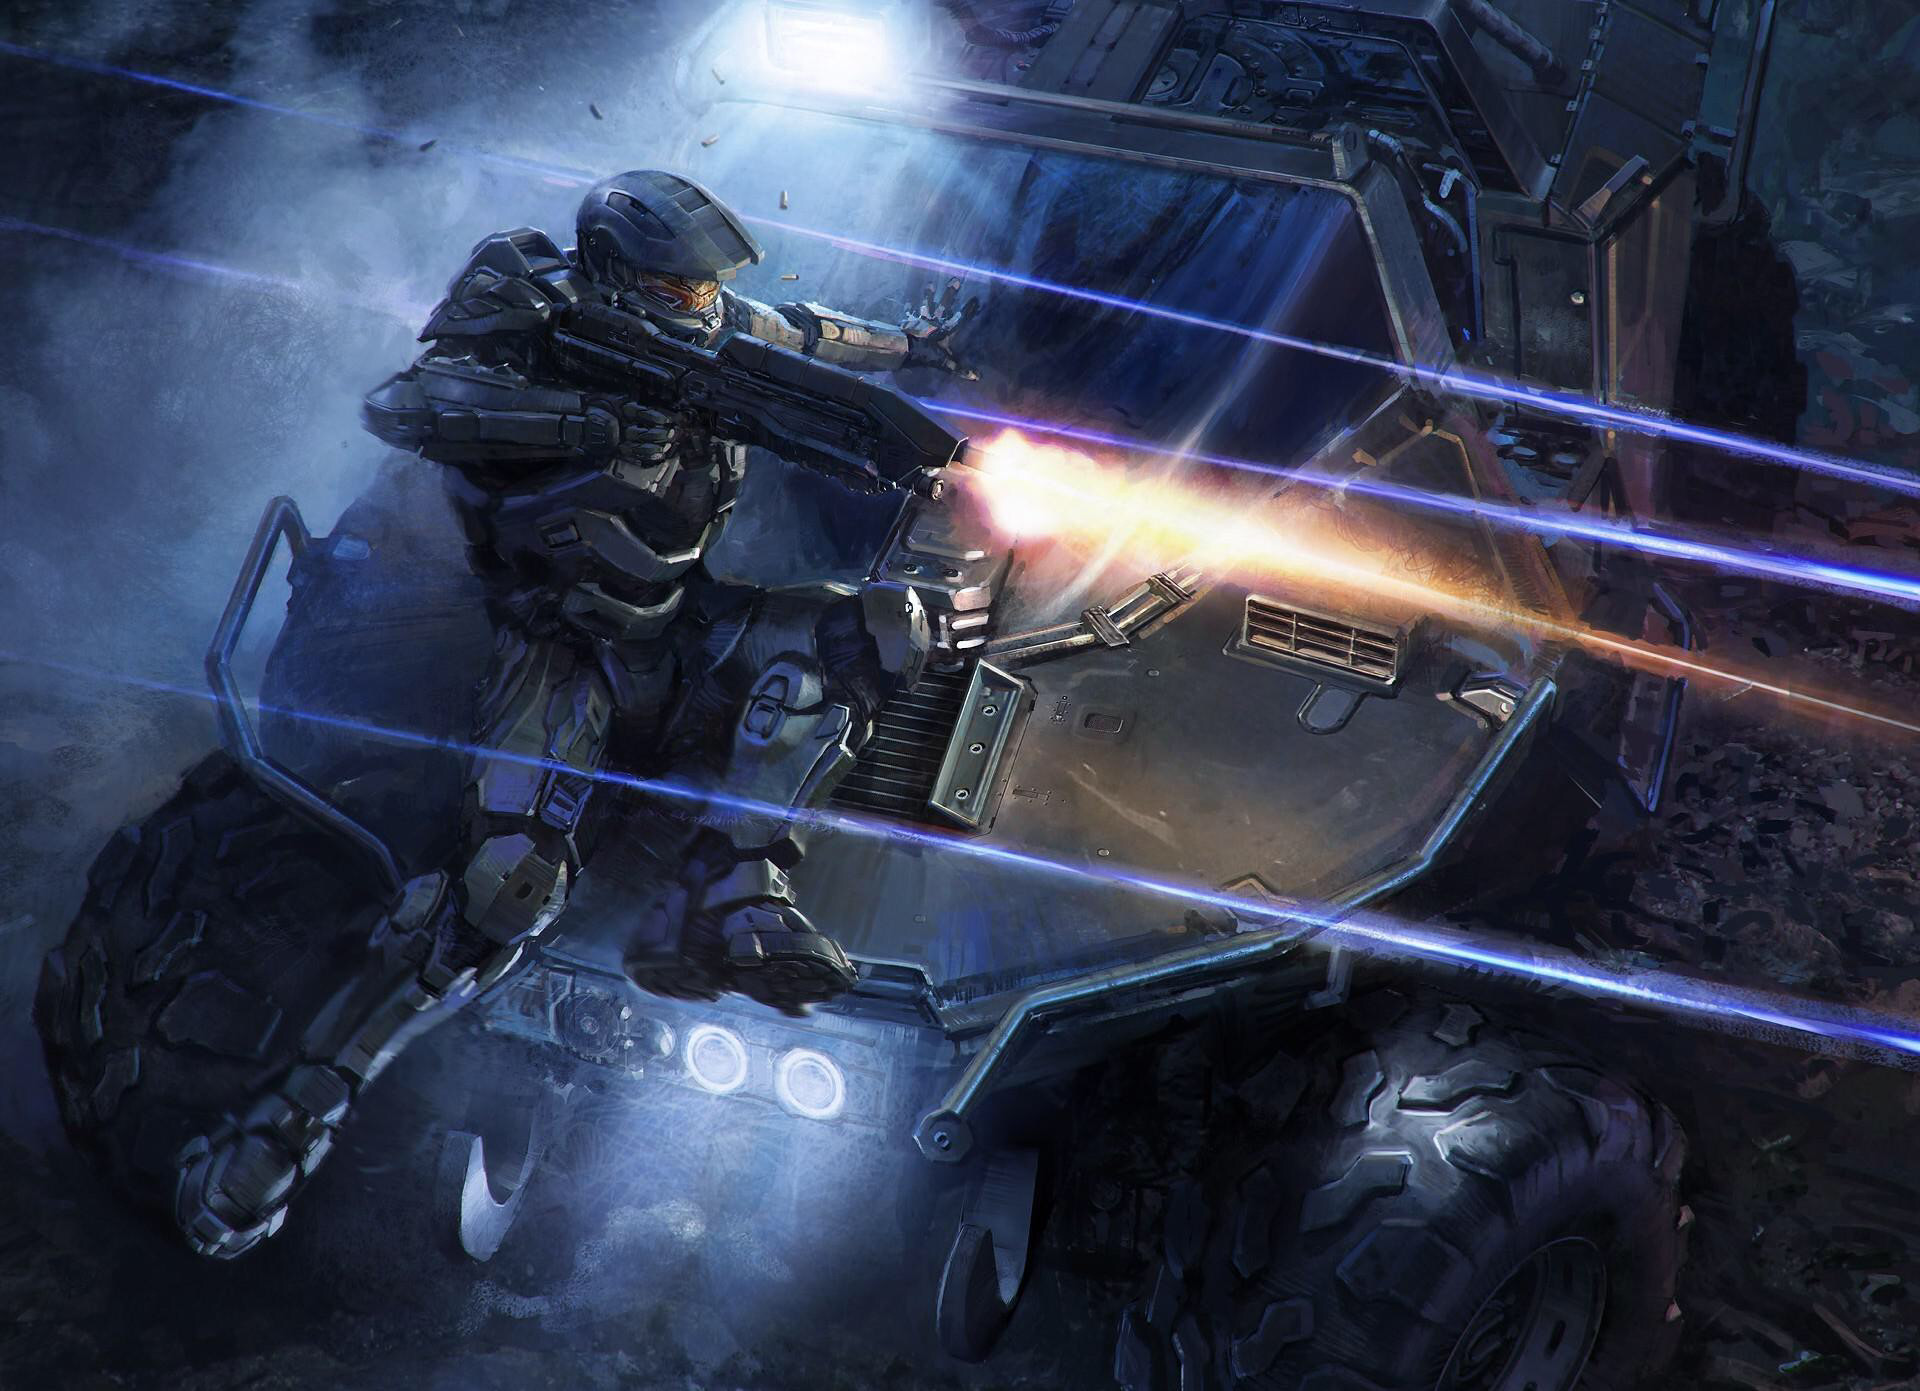 1920x1391 Share an #Halo# game wallpaper. Download #Game Wallpapers#: http: